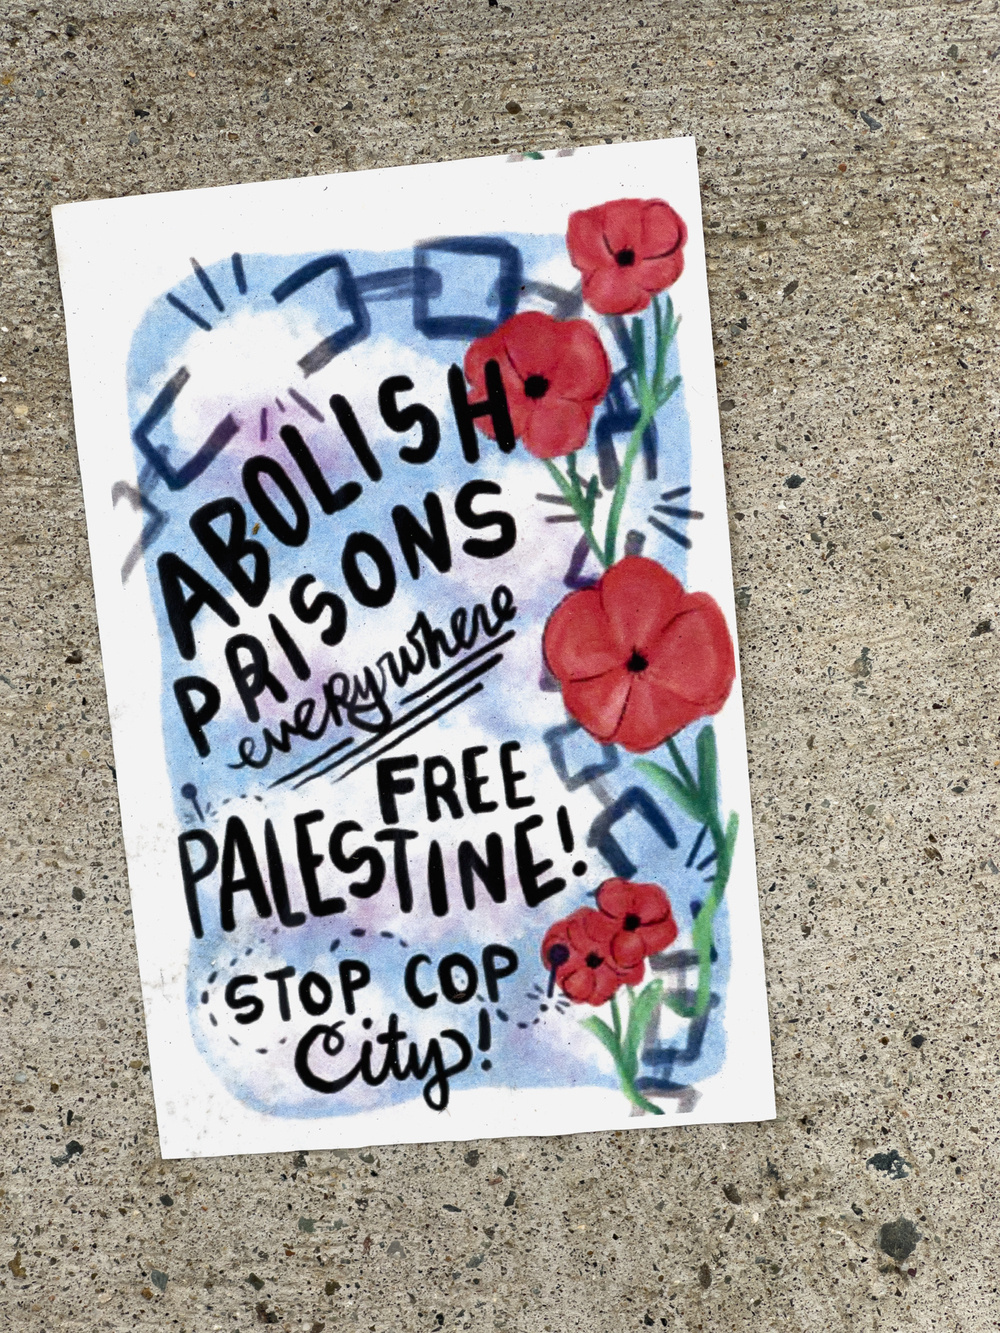 Sticker calling for the abolishment of prisons, the freeing of Palestine and stopping cop city. Decorated with red poppy like flowers.